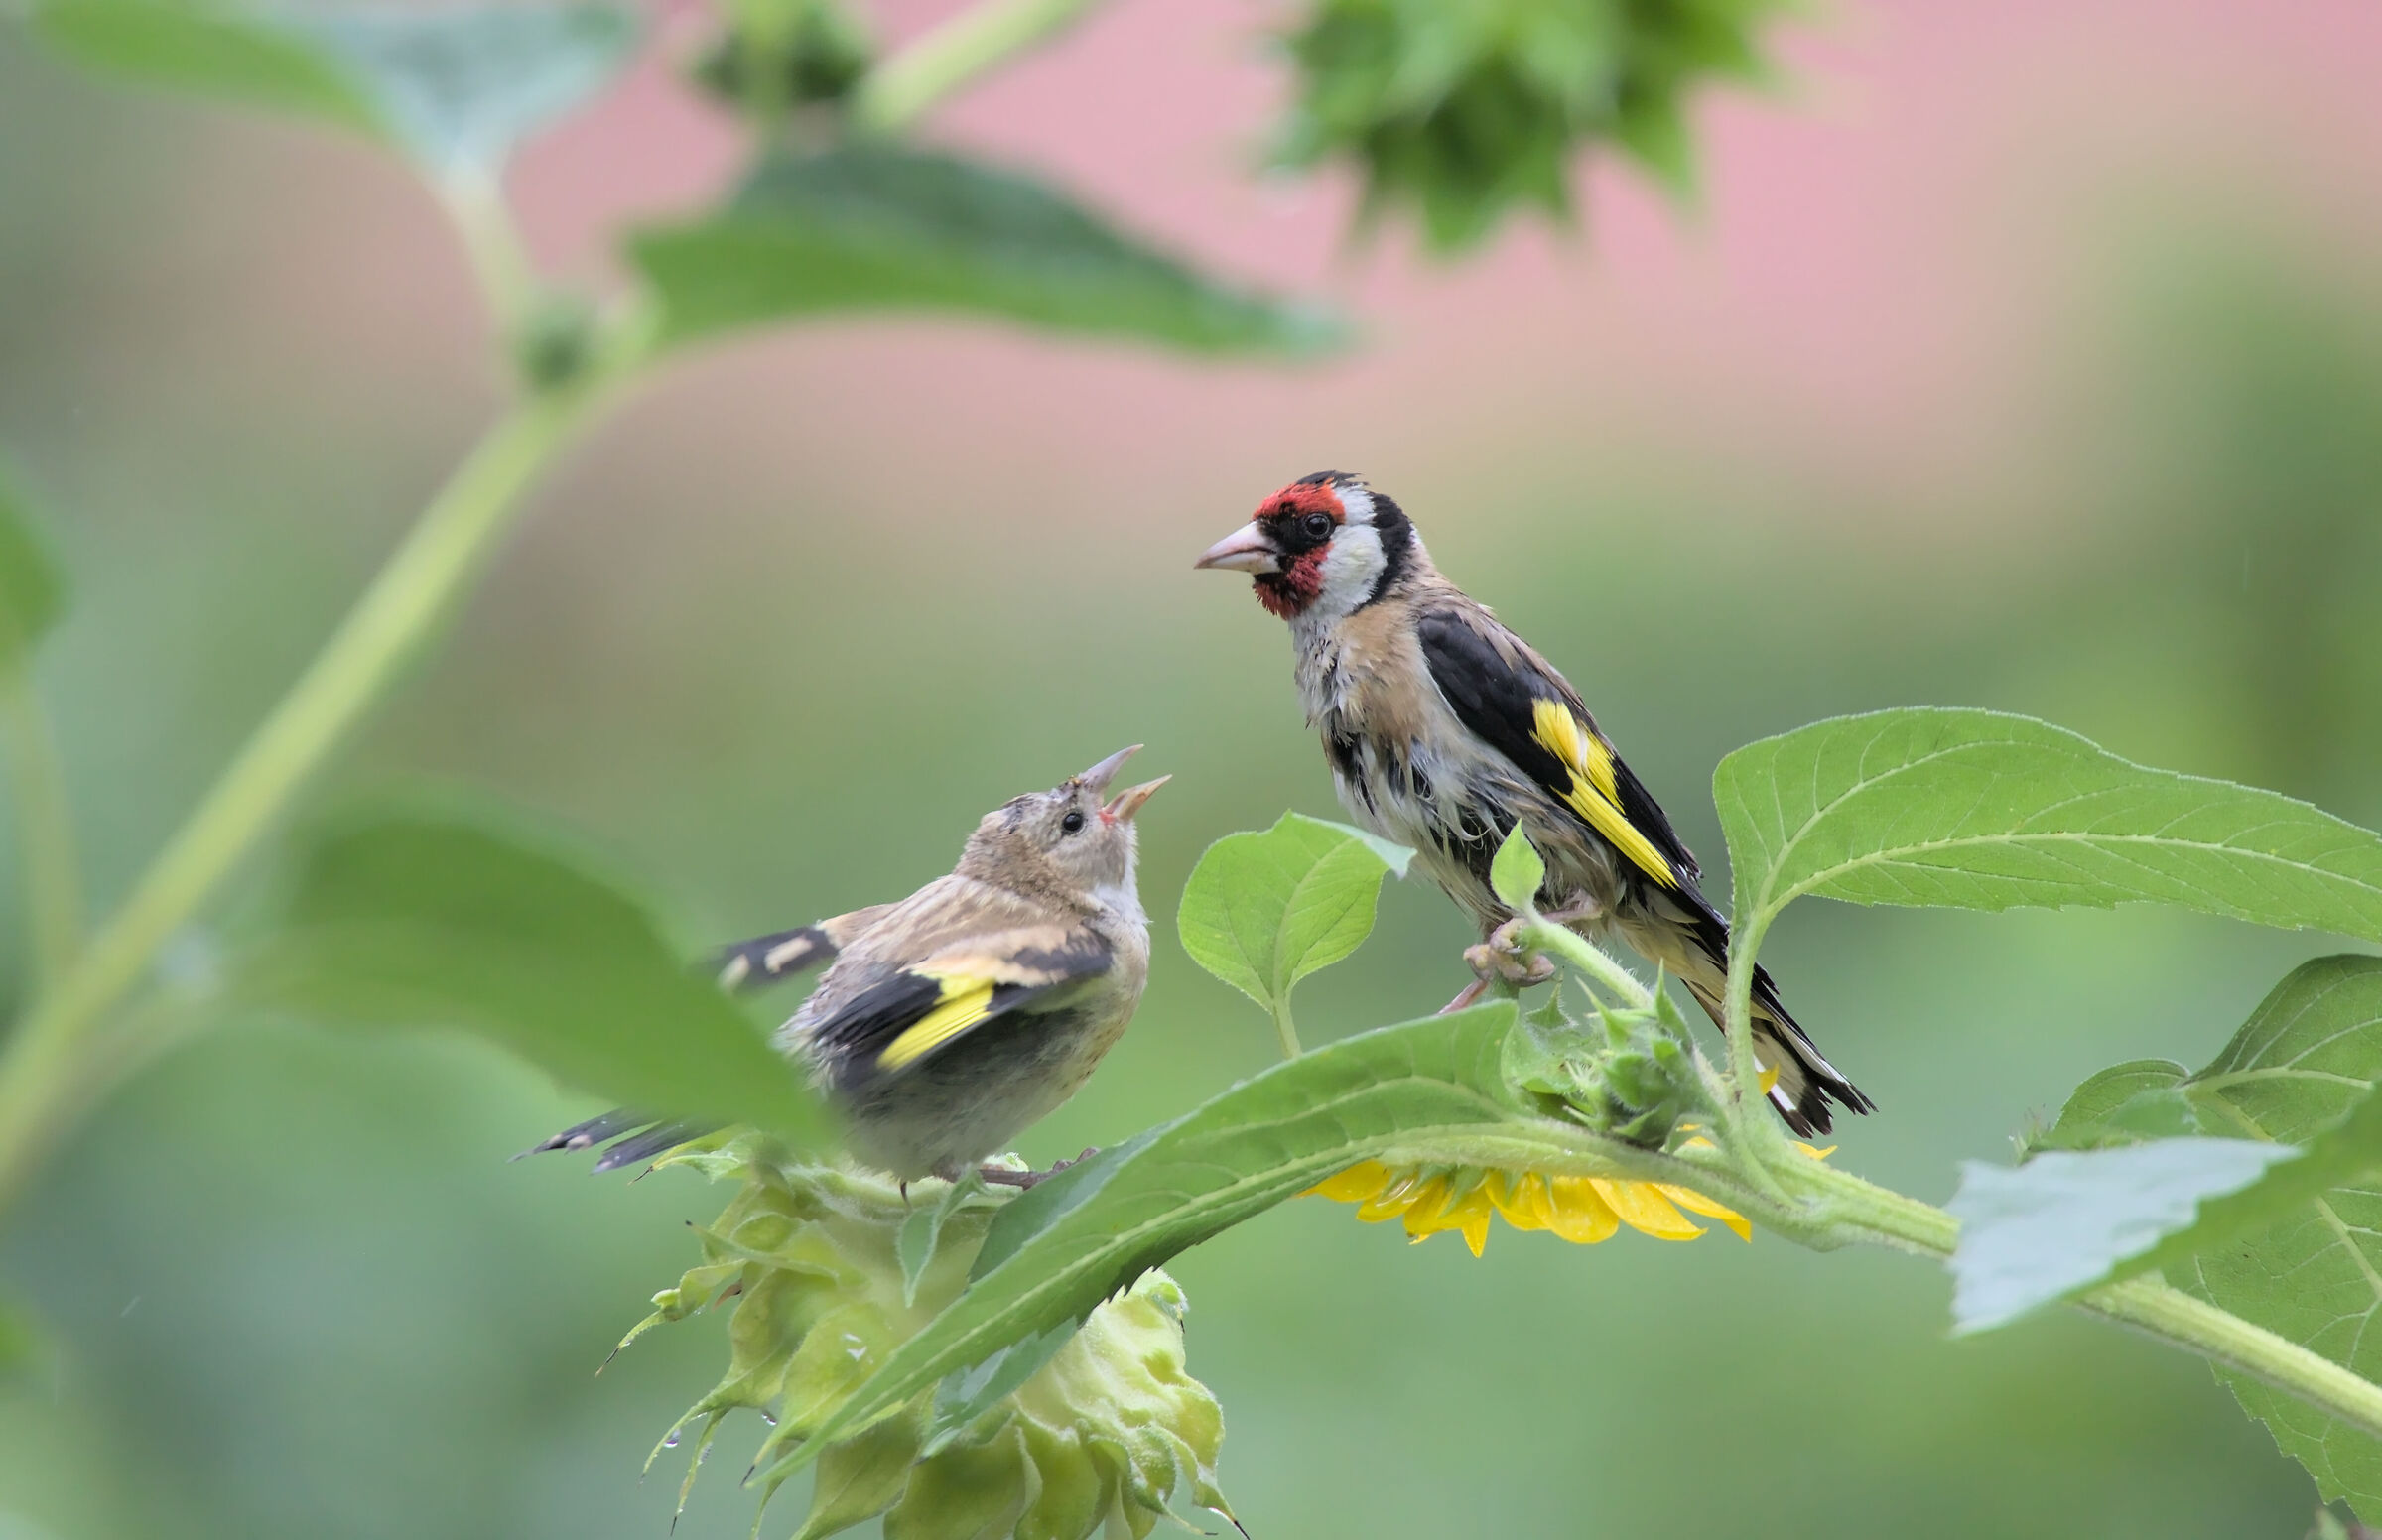 Adult and young goldfinch in the rain...